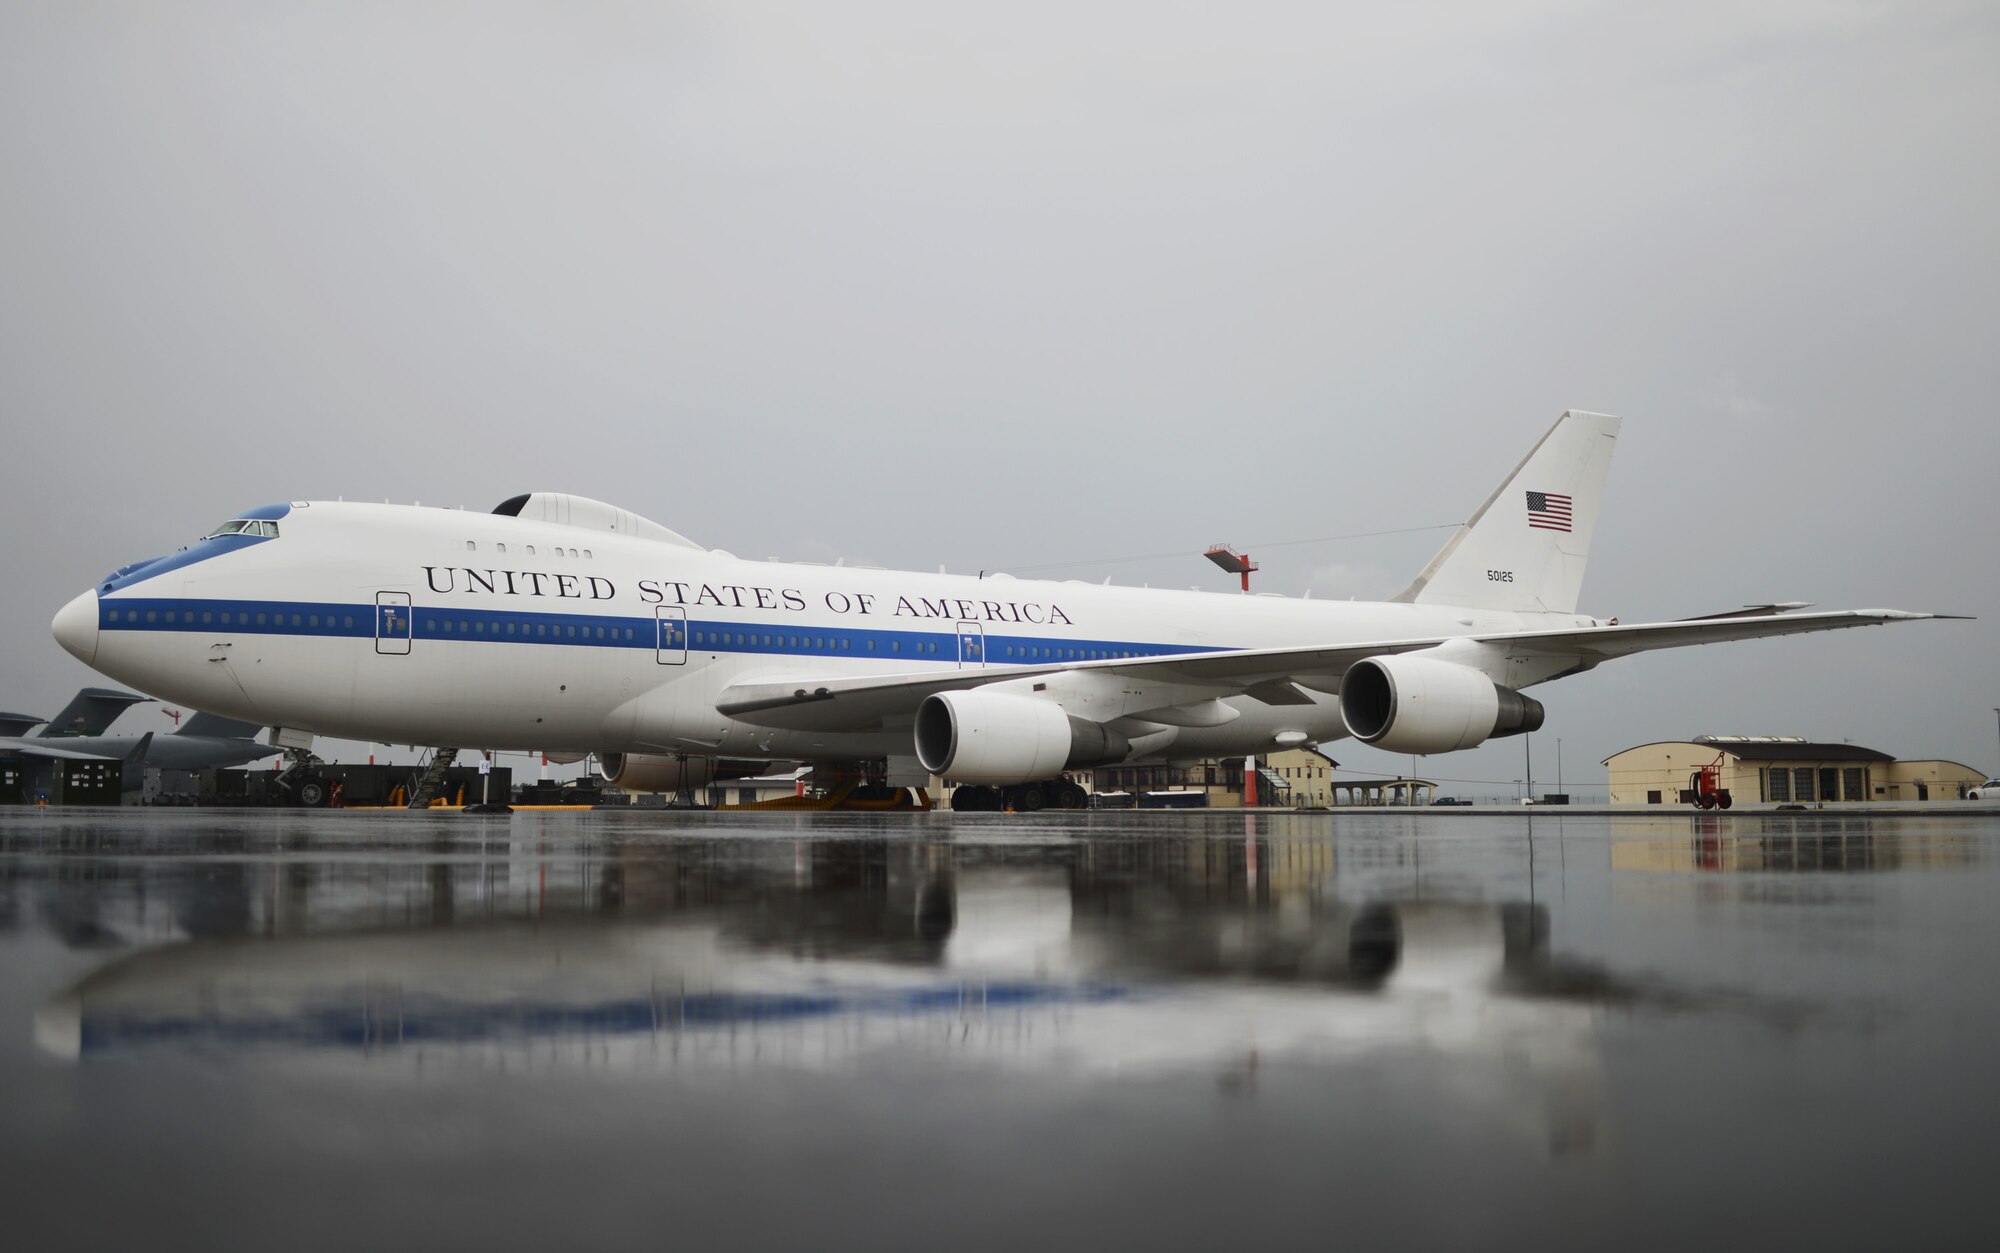 A U.S. Air Force E-4B aircraft sits on the ramp outside the 726th Air Mobility Squadron at Spangdahlem Air Base, Germany, June 4, 2014. The E-4B, a militarized version of the Boeing 747-200, serves as the National Airborne Operations Center and provides the President of the United States, the U.S. Secretary of Defense and the Chairman of the Joint Chiefs of Staff with a worldwide, survivable and enduring command center for exercising national security responsibilities through all levels of conflict. The parked aircraft recently supported President Obama’s visit to Europe. (U.S. Air Force photo by Senior Airman Gustavo Castillo/Released)